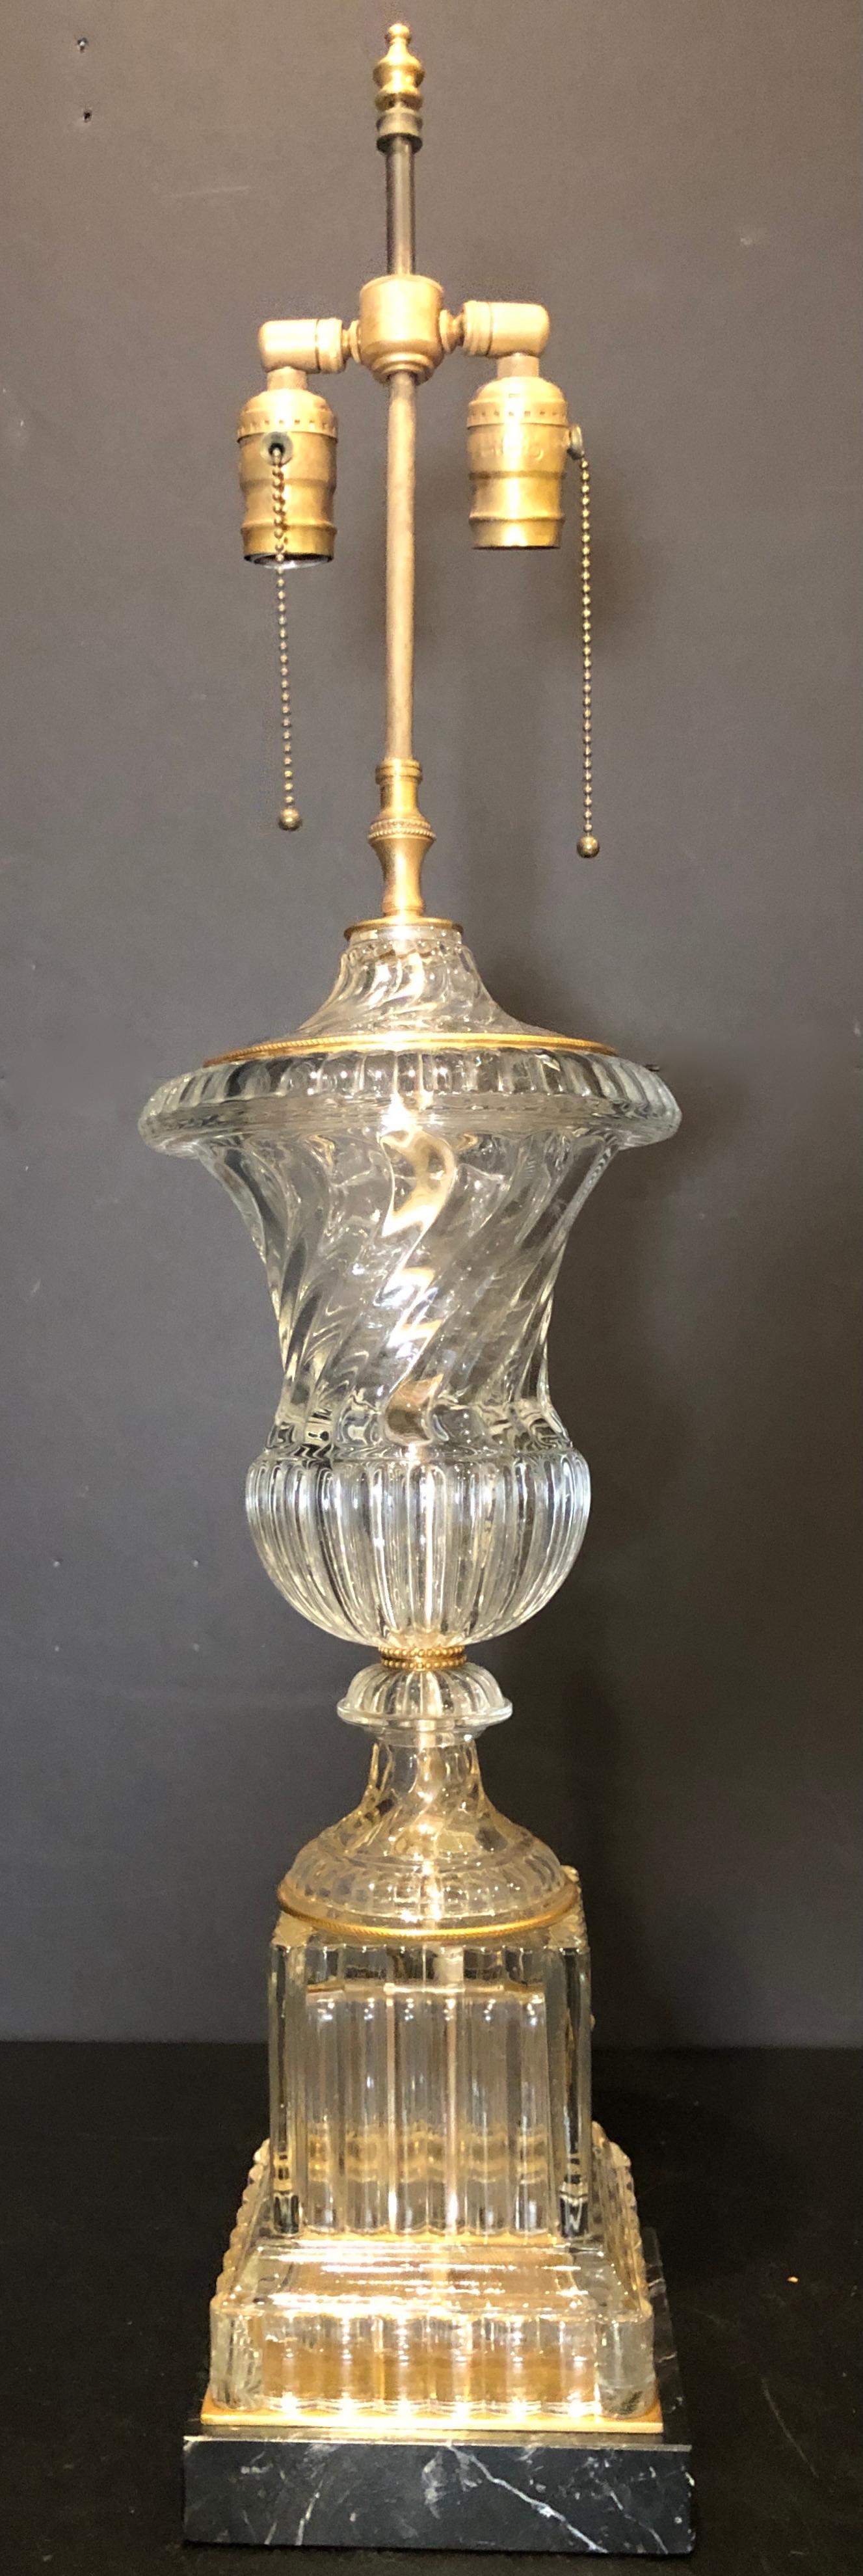 Baccarat spiral urn form table lamp. Baccarat style urn or vase form lamp on square black veined marble base with subtle gilt bronze embellishments, by Paul Hanson Lighting Co. 
Base is 6